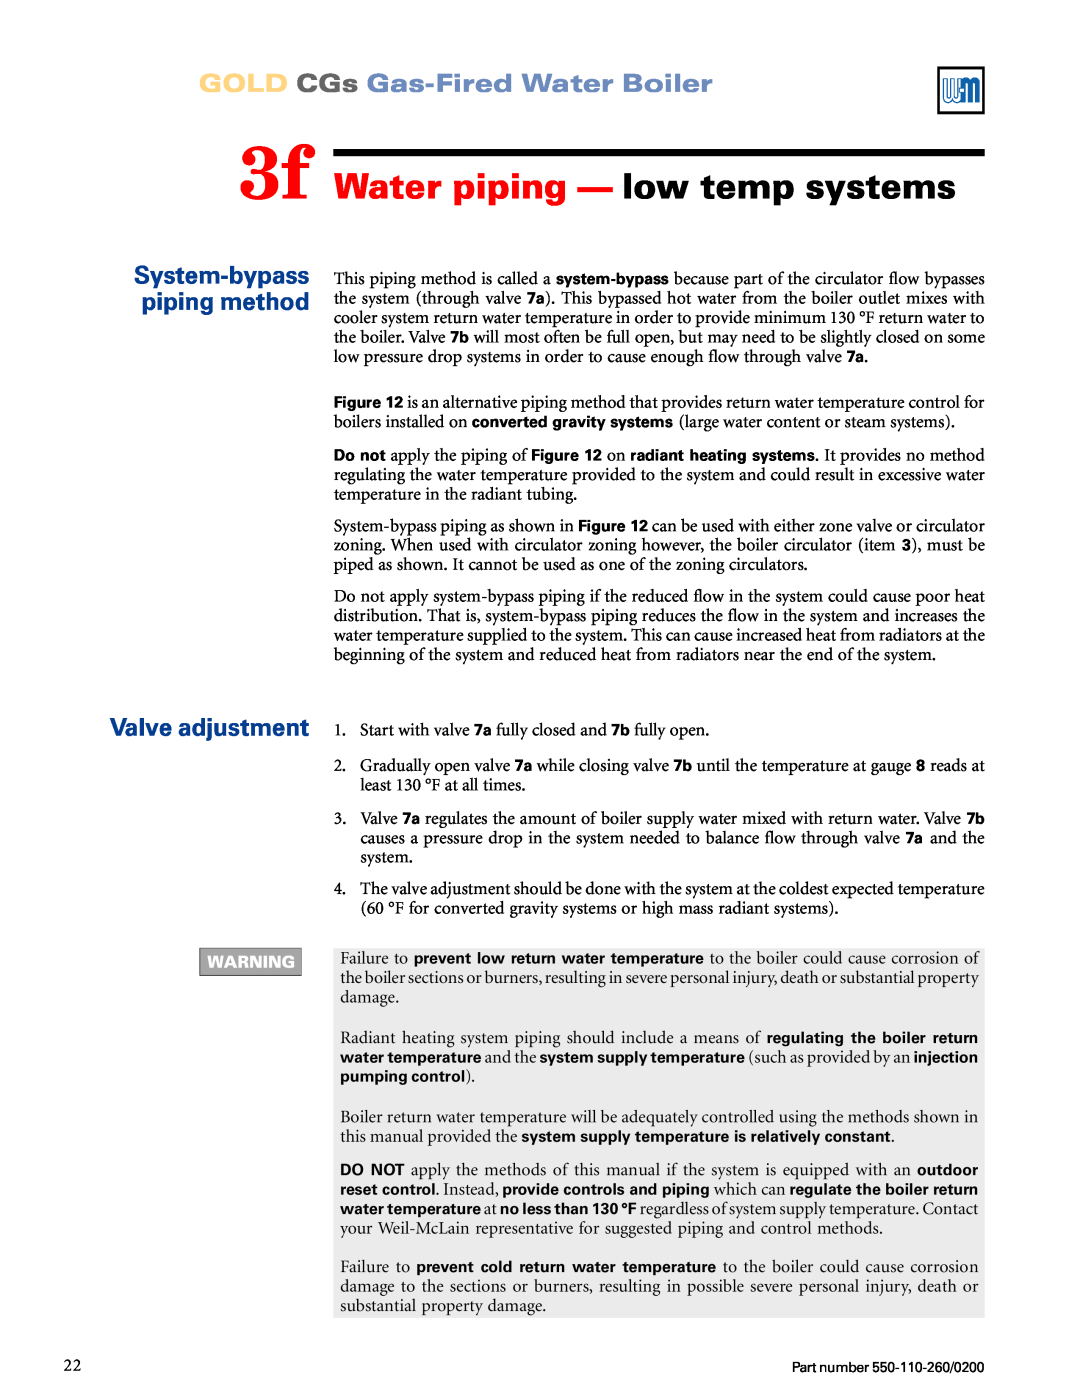 Weil-McLain 550-110-260/02002 manual 3f Water piping - low temp systems, Valve adjustment, GOLD CGs Gas-FiredWater Boiler 